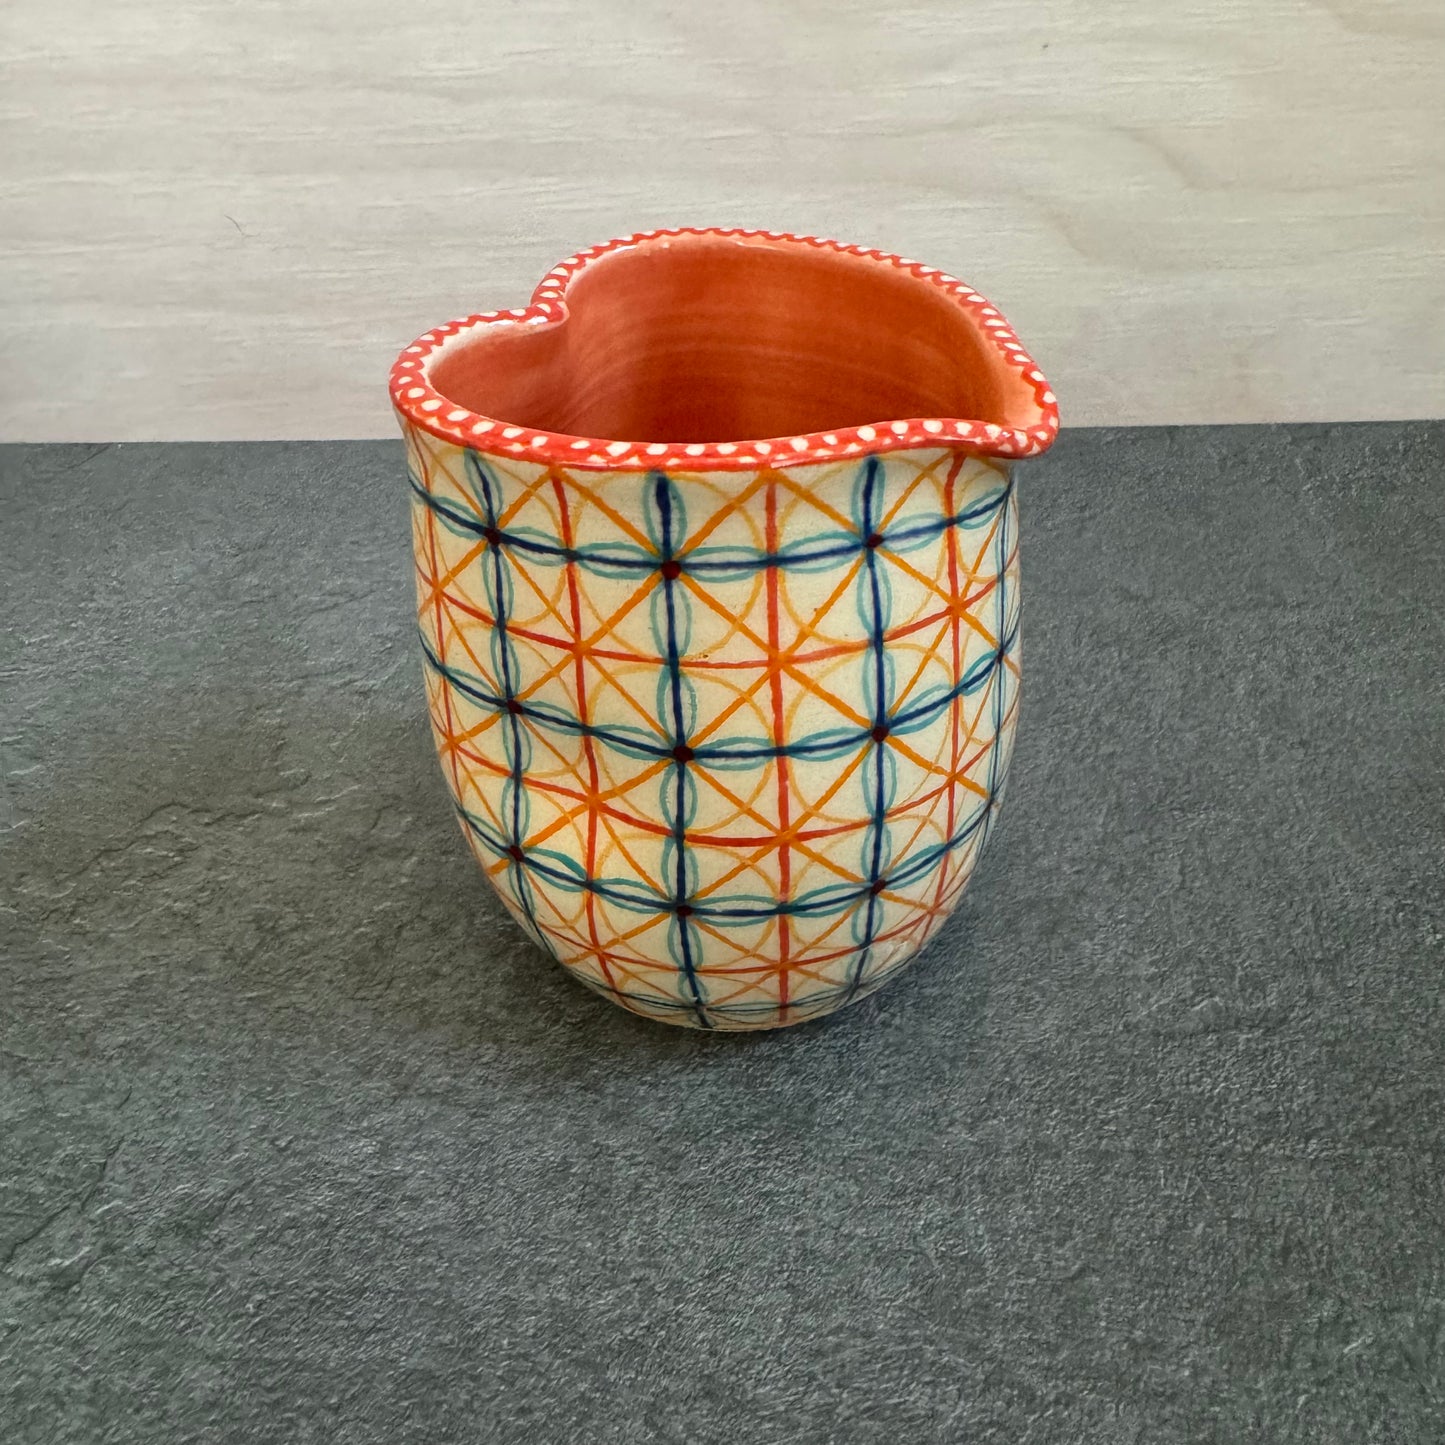 Heart Cup with Colorful Circular Designs